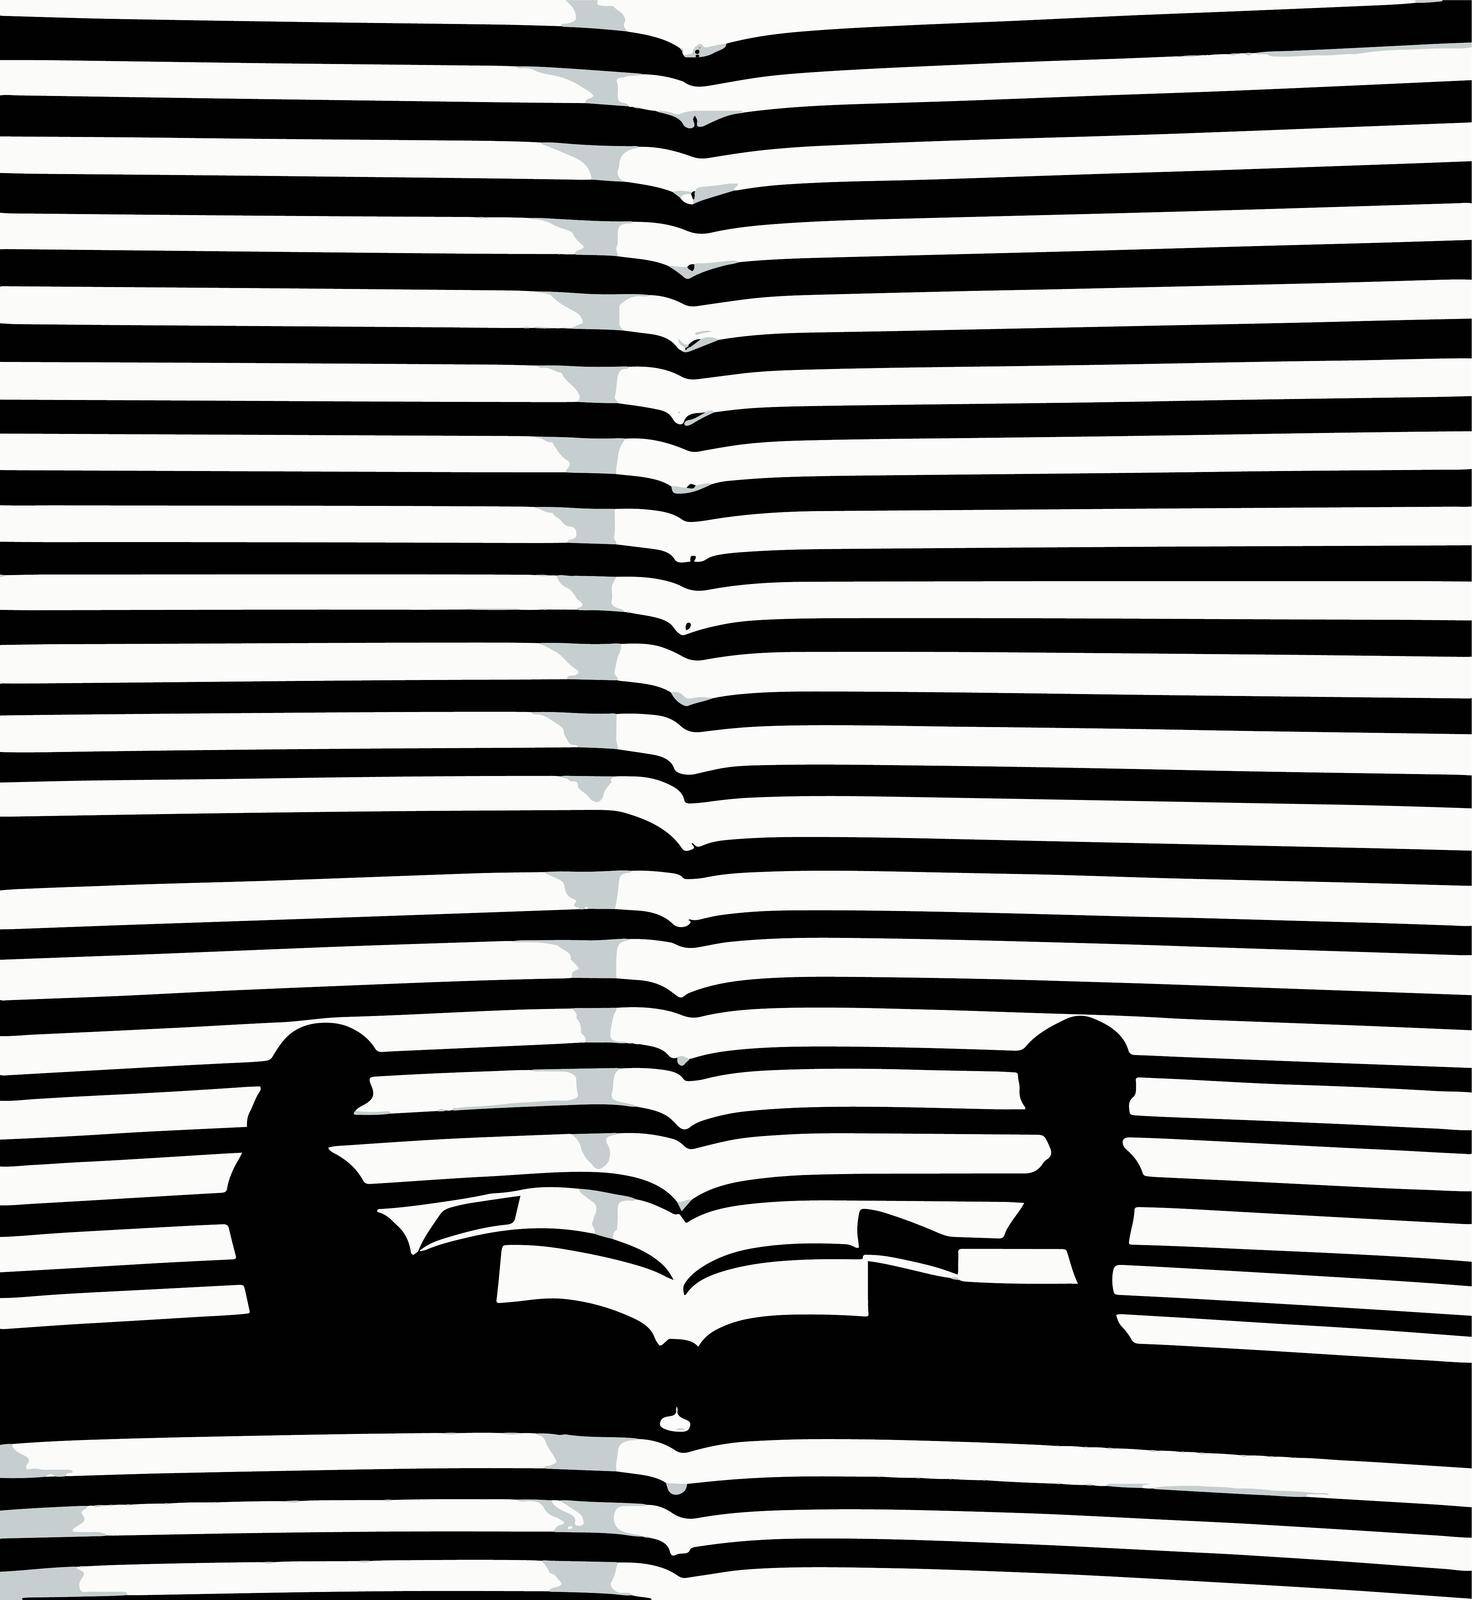 silhouette of people reading a book with black and white lines